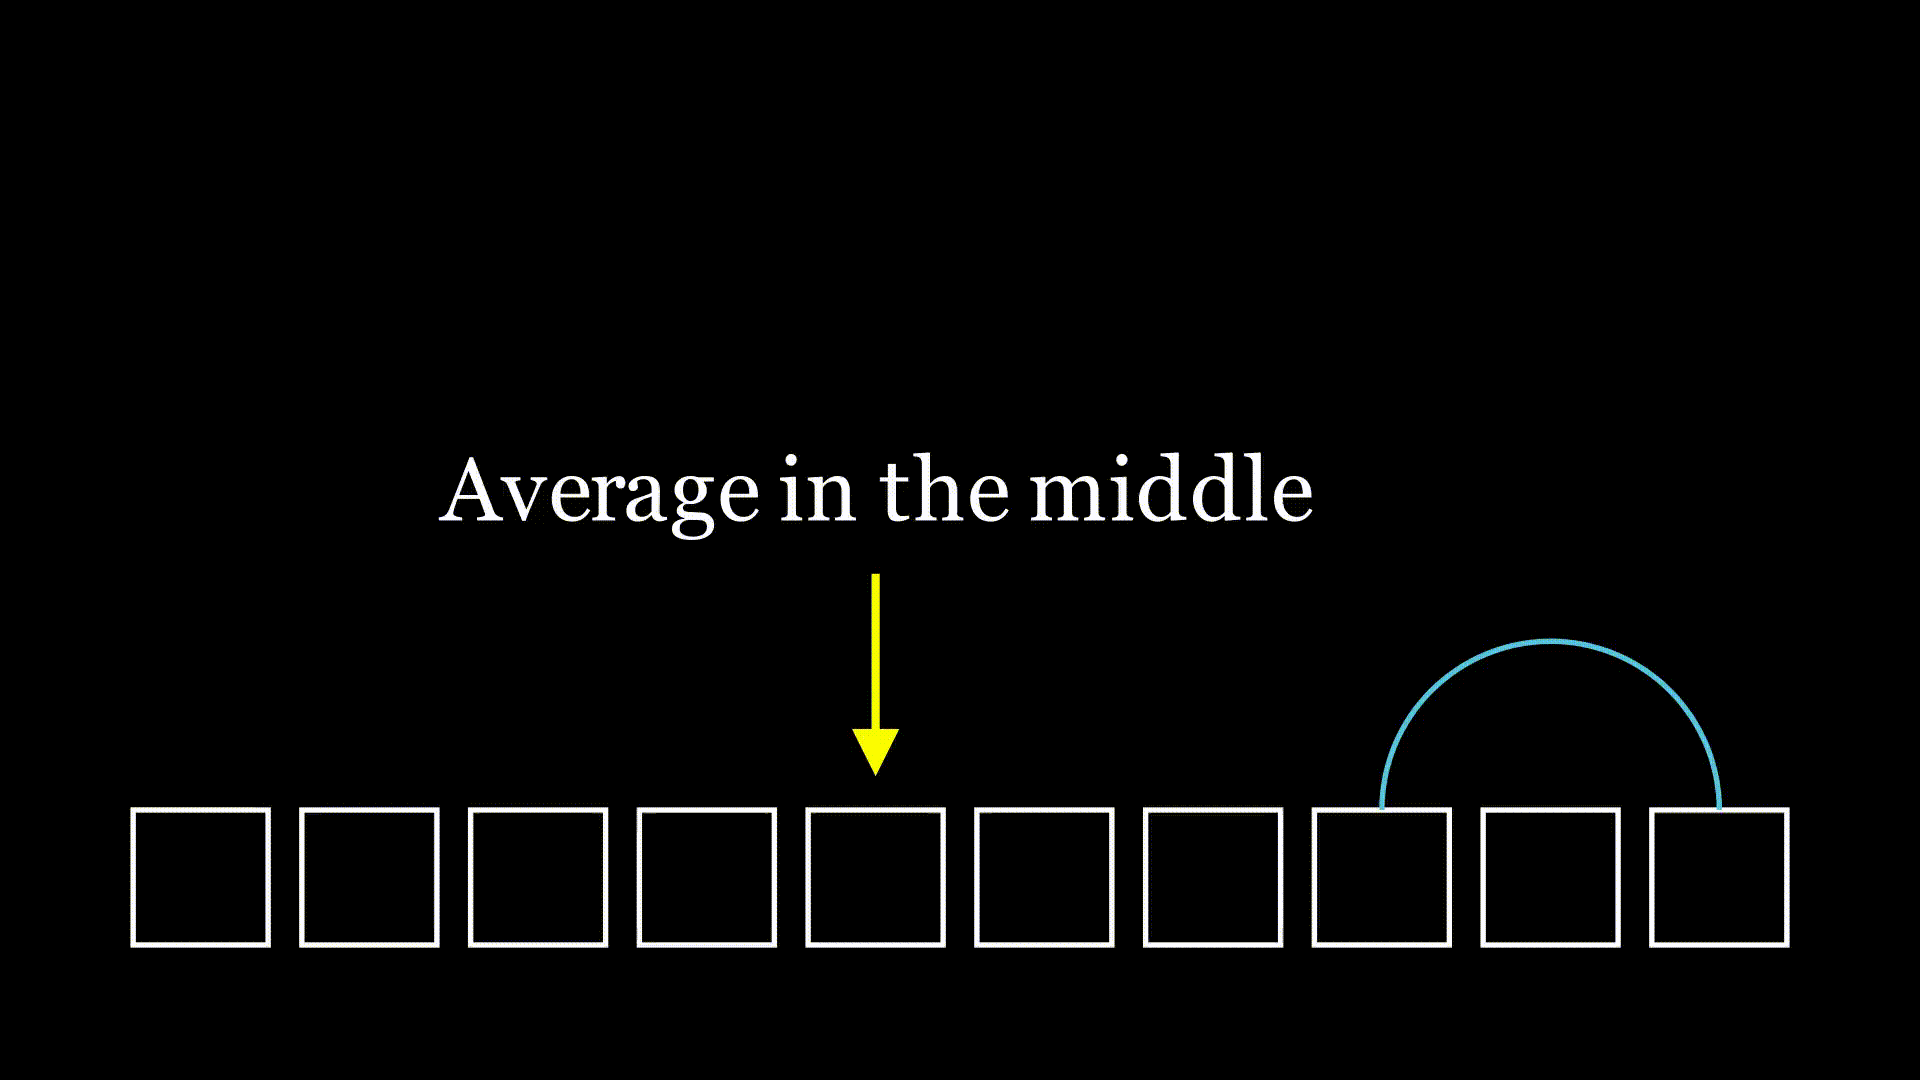 Animation of choosing an average position to the left